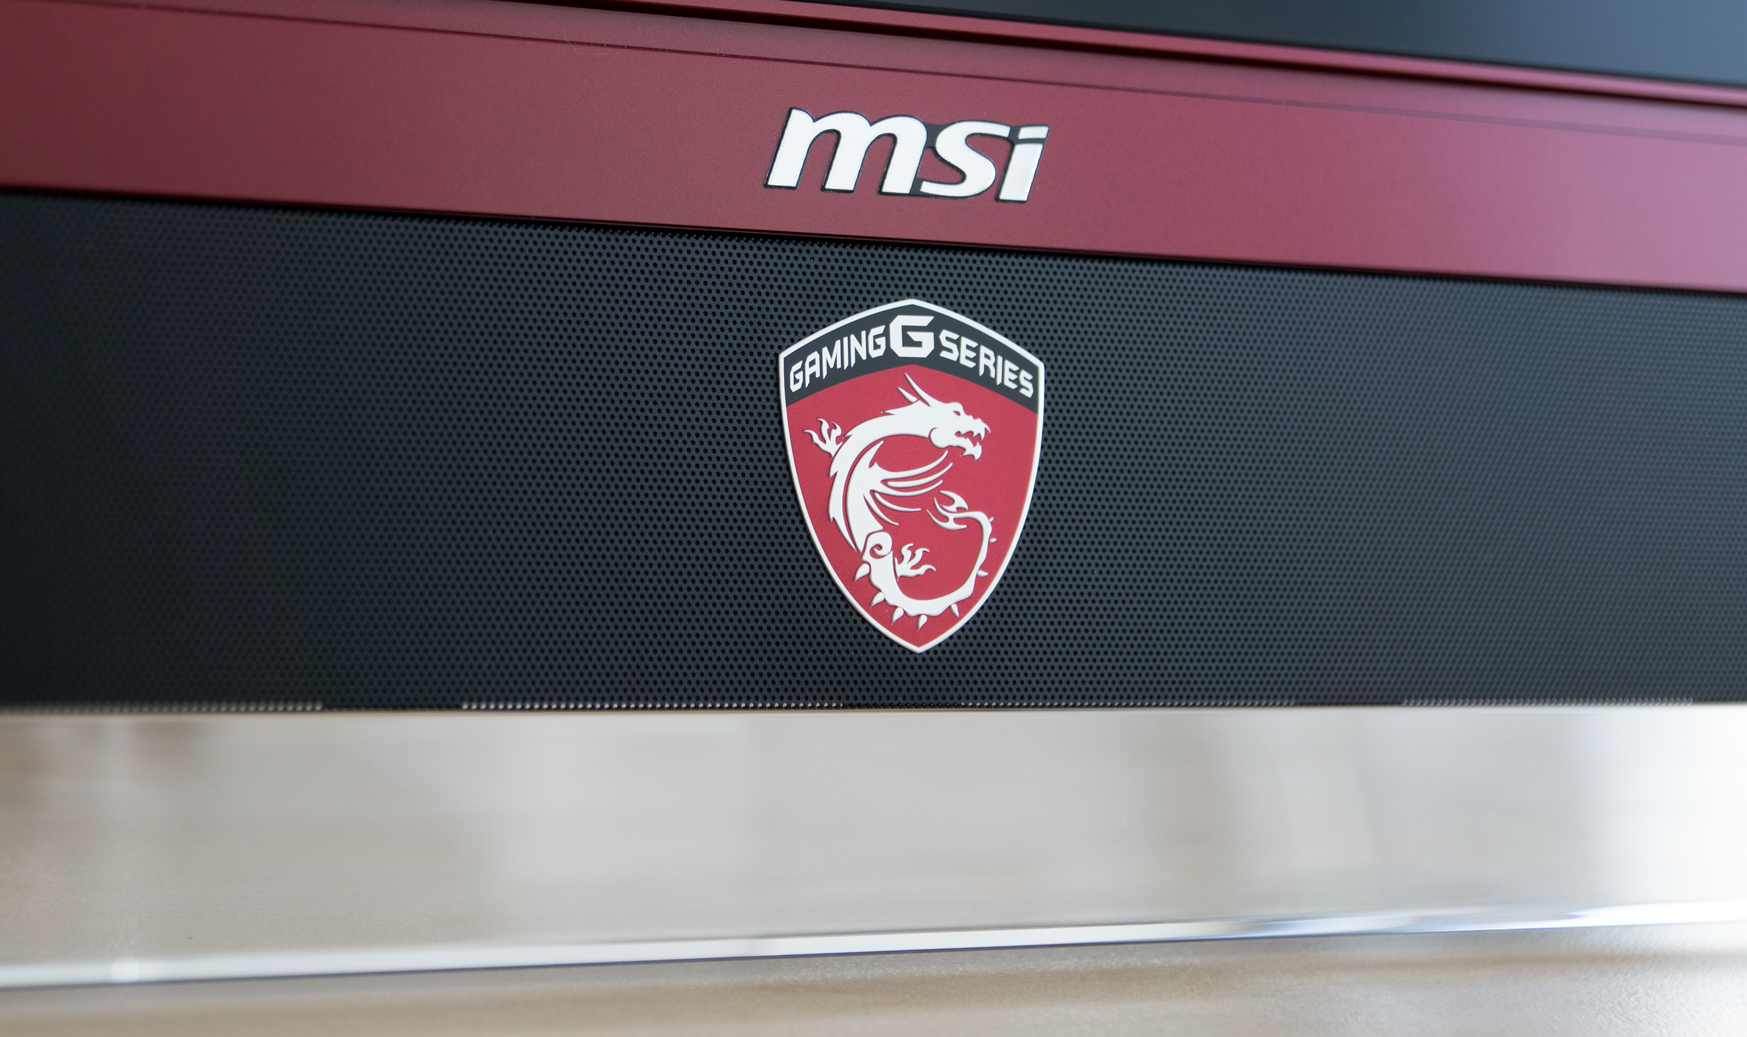 MSI AG270 All-in-One review: The MSI AG270 is a rare PC gaming all